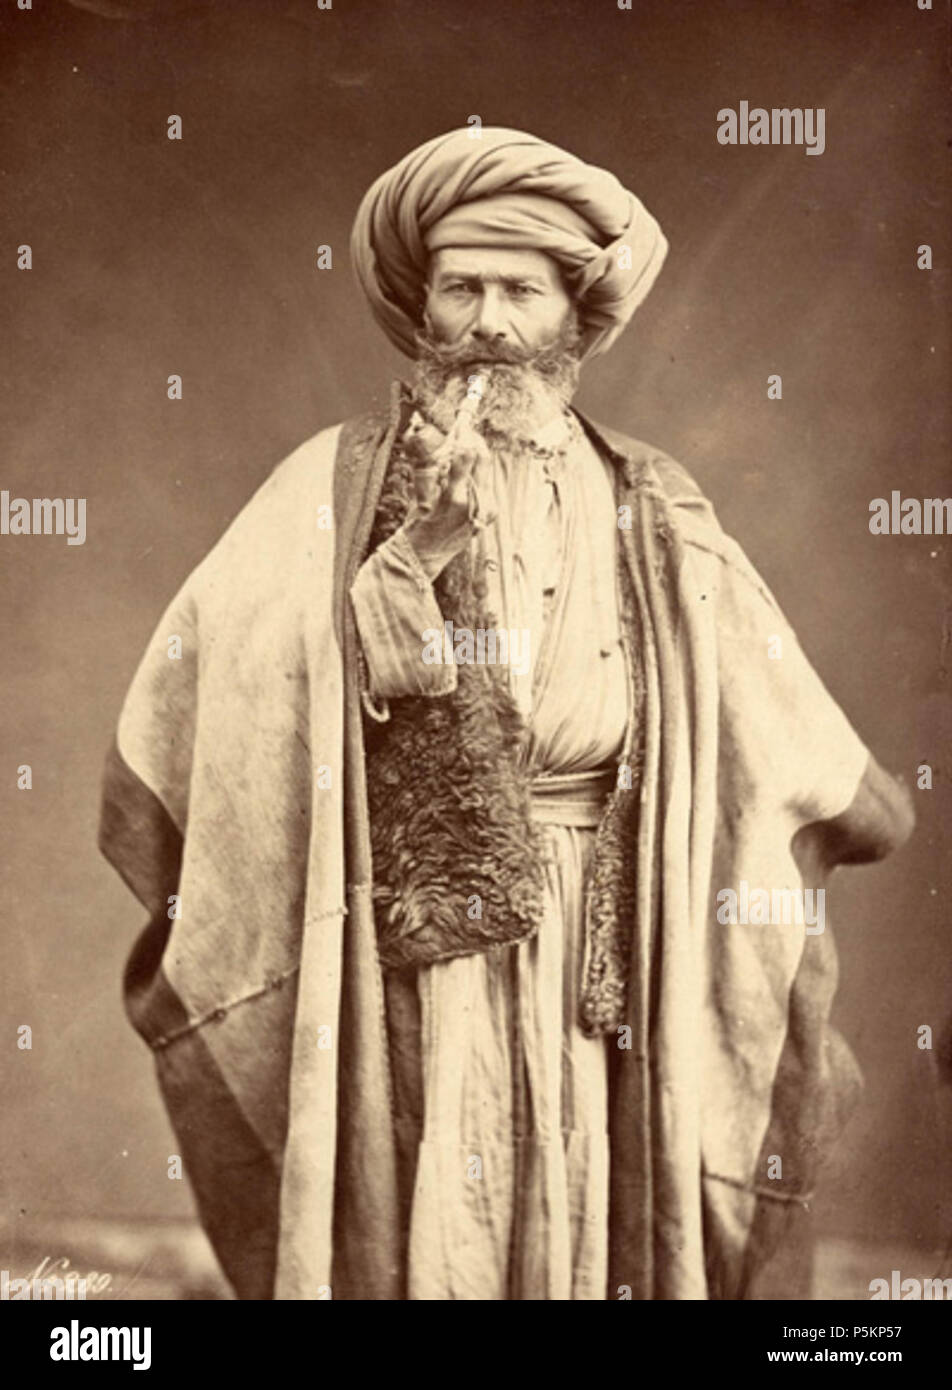 N/A. Arab man smoking pipe, late 1800s. Late 1800s..   Félix Bonfils  (1831–1885)     Alternative names Maison Bonfils, F. Bonfils et Cie (studio name)  Description French photographer  Date of birth/death 8 March 1831 1885  Location of birth/death Saint-Hippolyte-du-Fort, France Alès, France  Work period especially from 1867 to his death (1885)  Work location Ottoman Empire, Lebanon, Syria and Palestine  Authority control  : Q2915801 VIAF:54136350 ISNI:0000 0001 2133 3451 ULAN:500016696 LCCN:n87127847 Open Library:OL6397443A WorldCat 116 Arabpipe Stock Photo